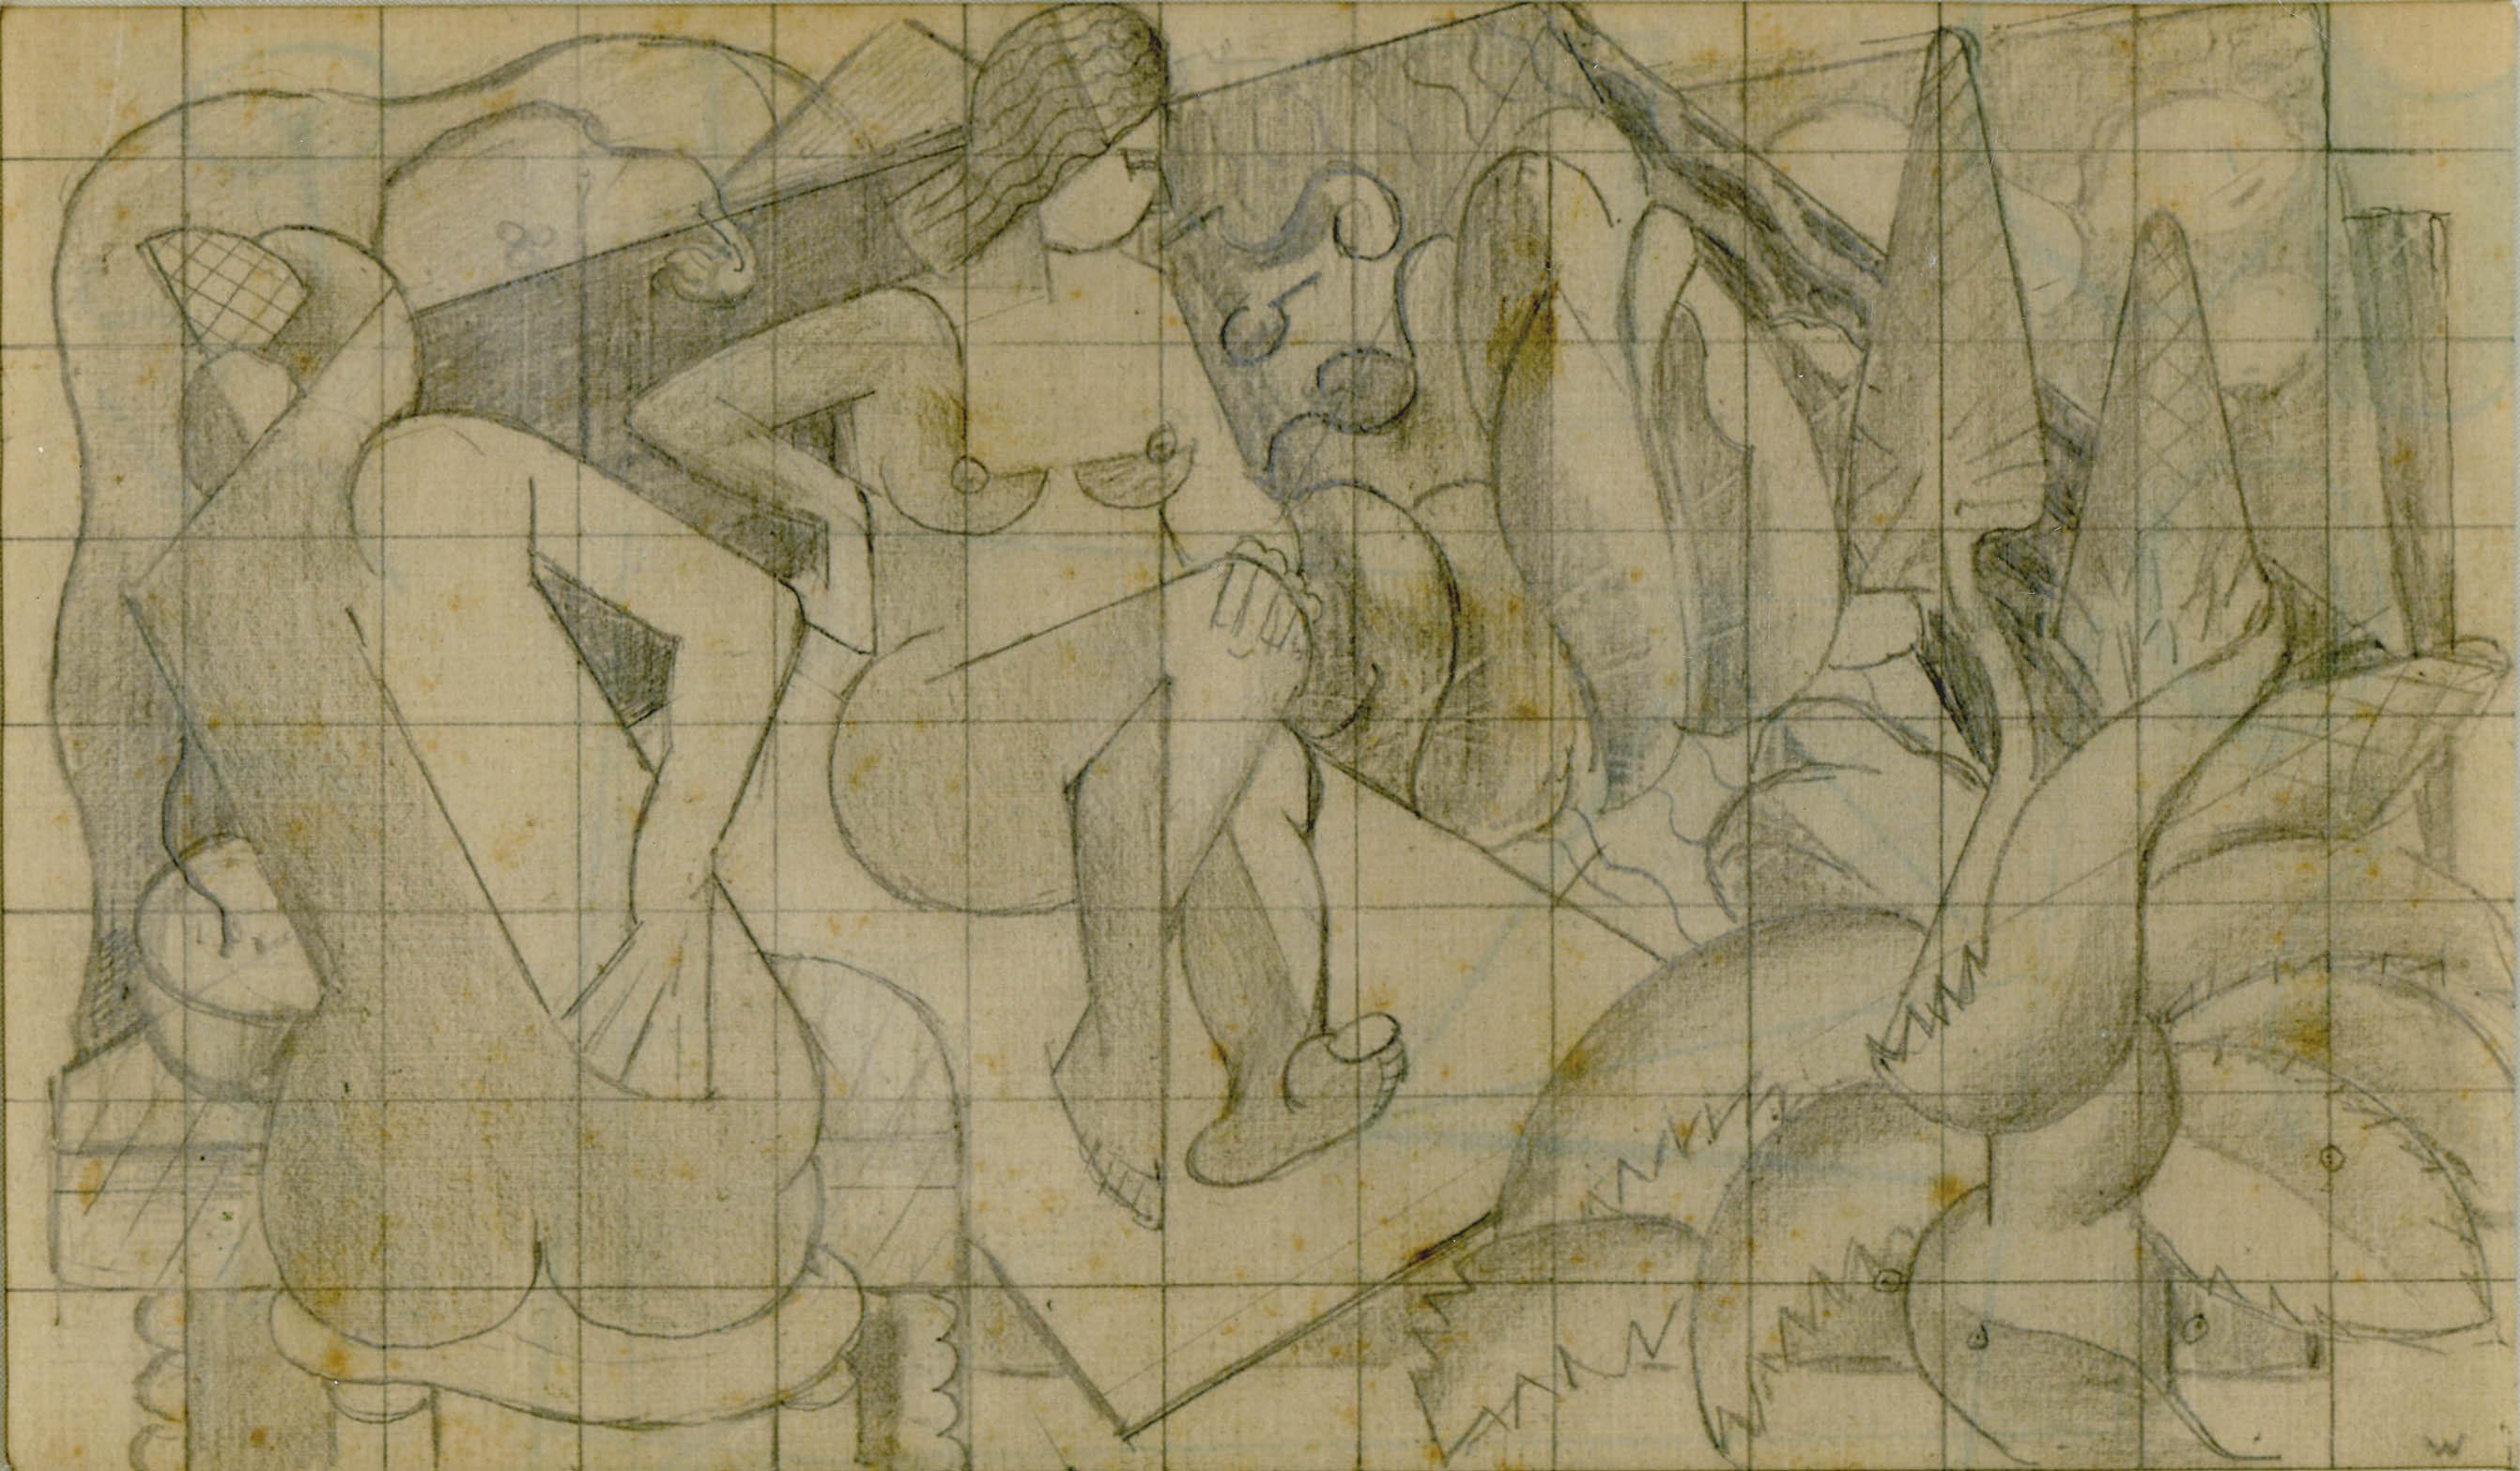 E. Ambrose Webster Nude - Preparatory drawing for Figure Composition, Carmel (CA.)